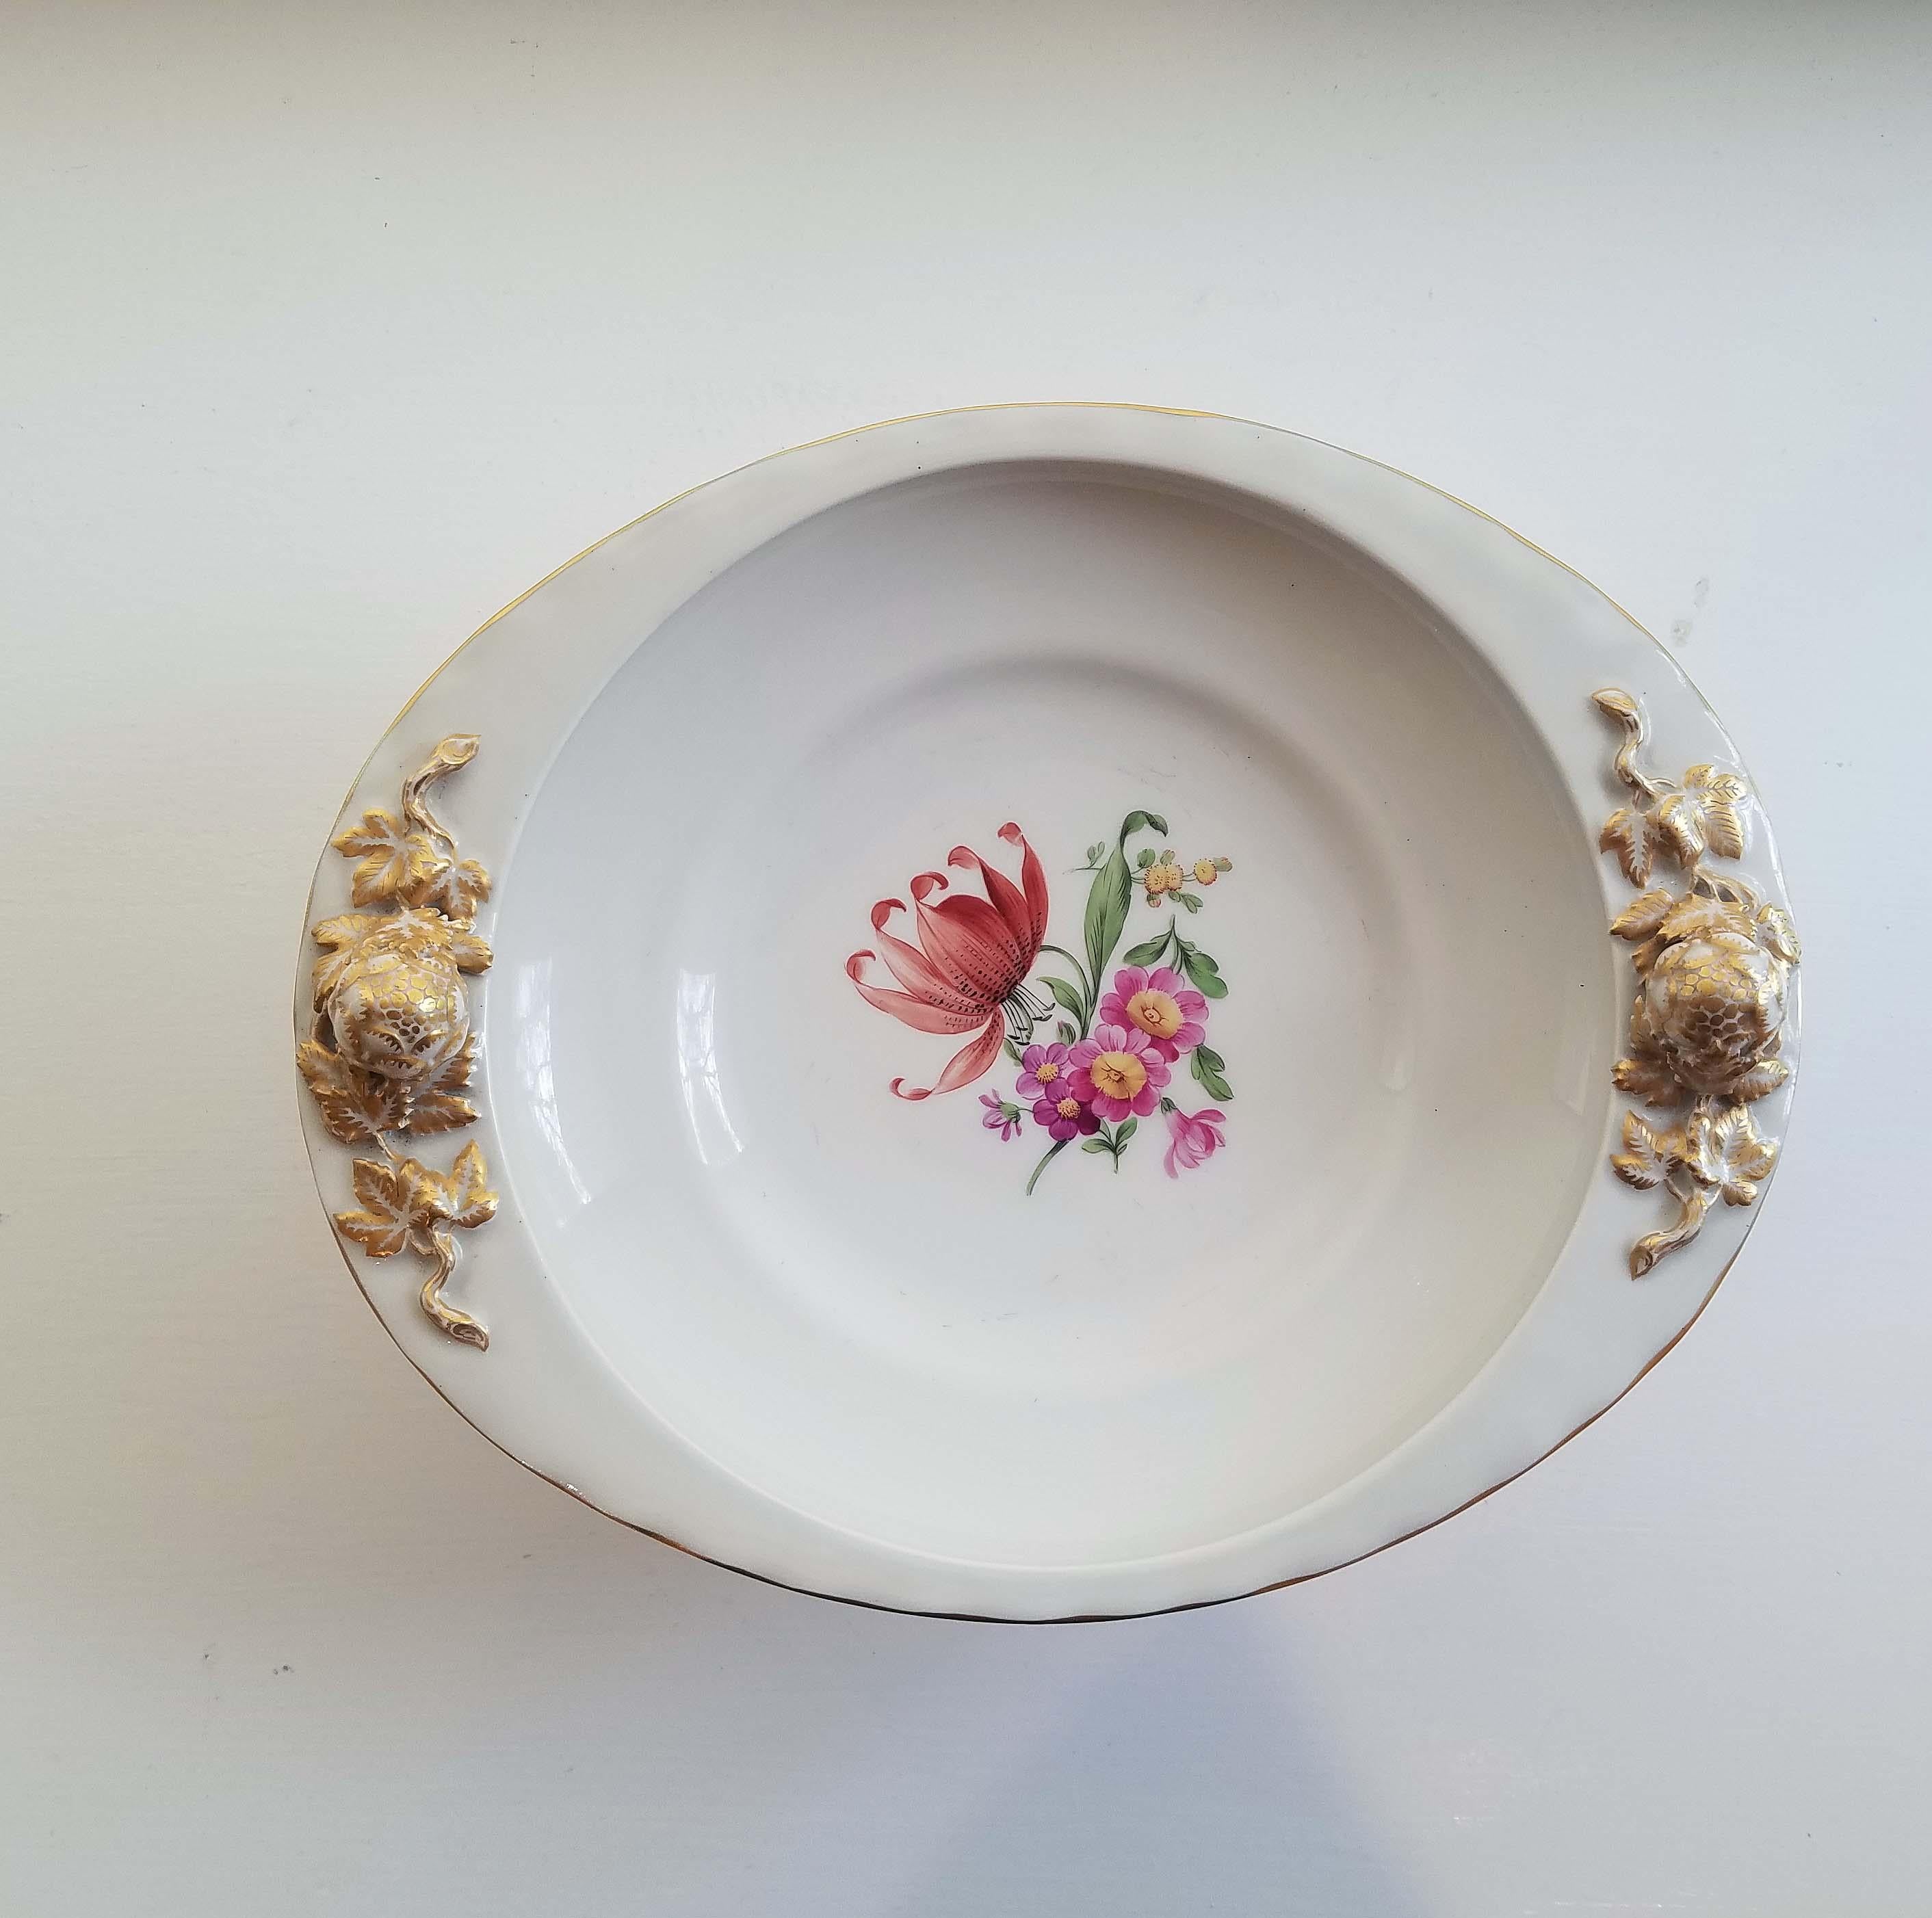 KPM Berlin Porcelain Tazza or Compote For Sale 1